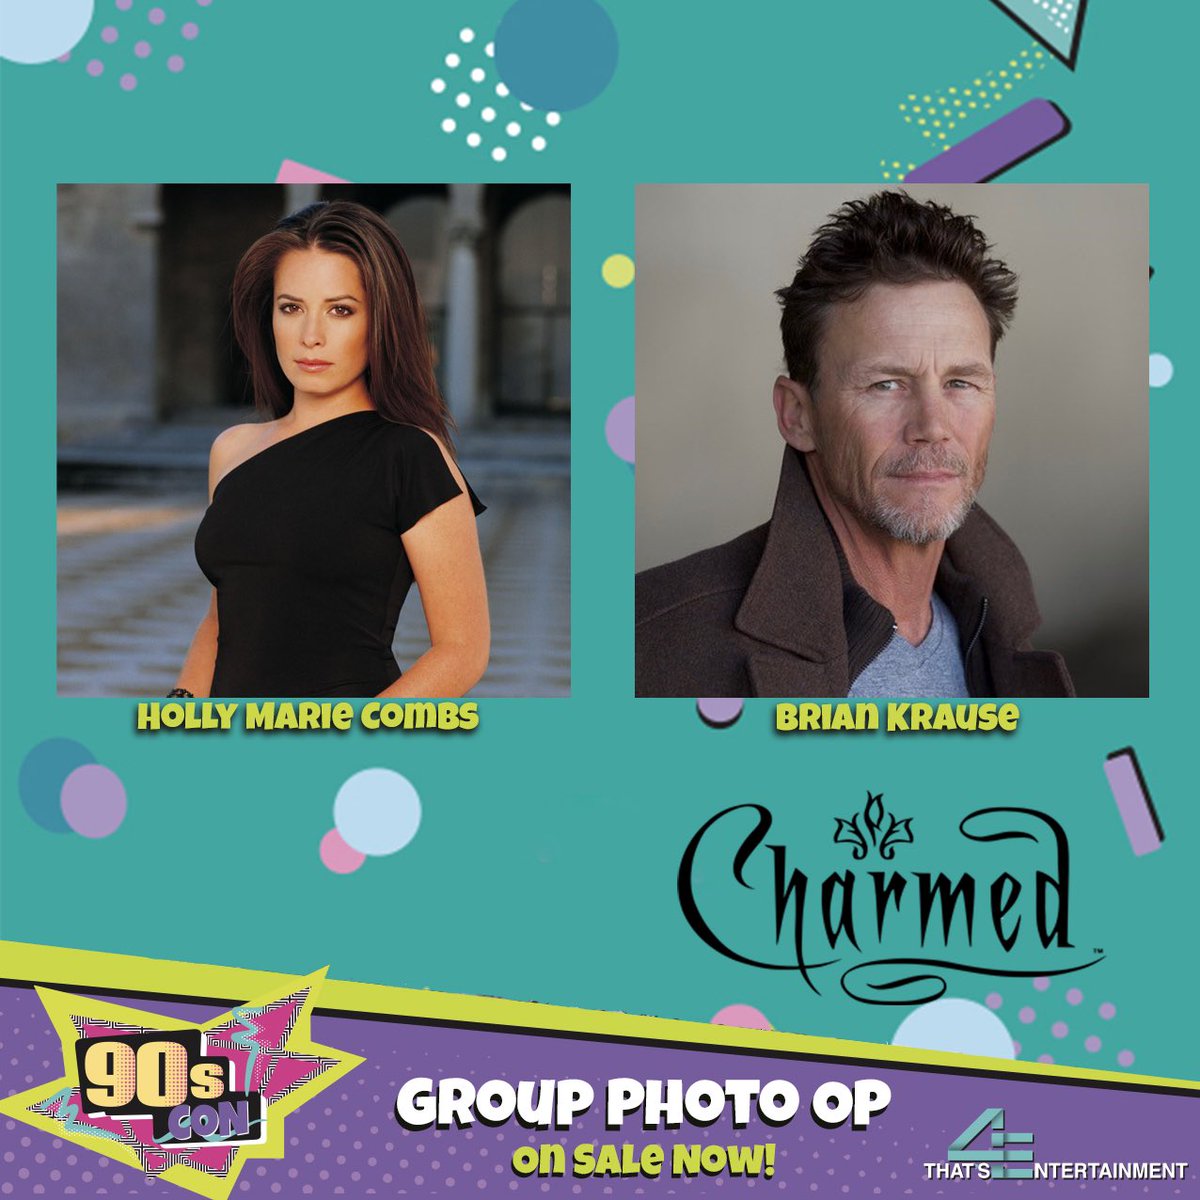 🪄 Things are getting a magical at #90sCon today because the #Charmed duo photo op with @H_Combs and #BrianKrause is now on sale! 📸 To purchase head to our website: thats4entertainment.com/90scon 🚨 Also now on sale are solo photo ops with Nick Carter, AJ McLean and Joey Fatone!